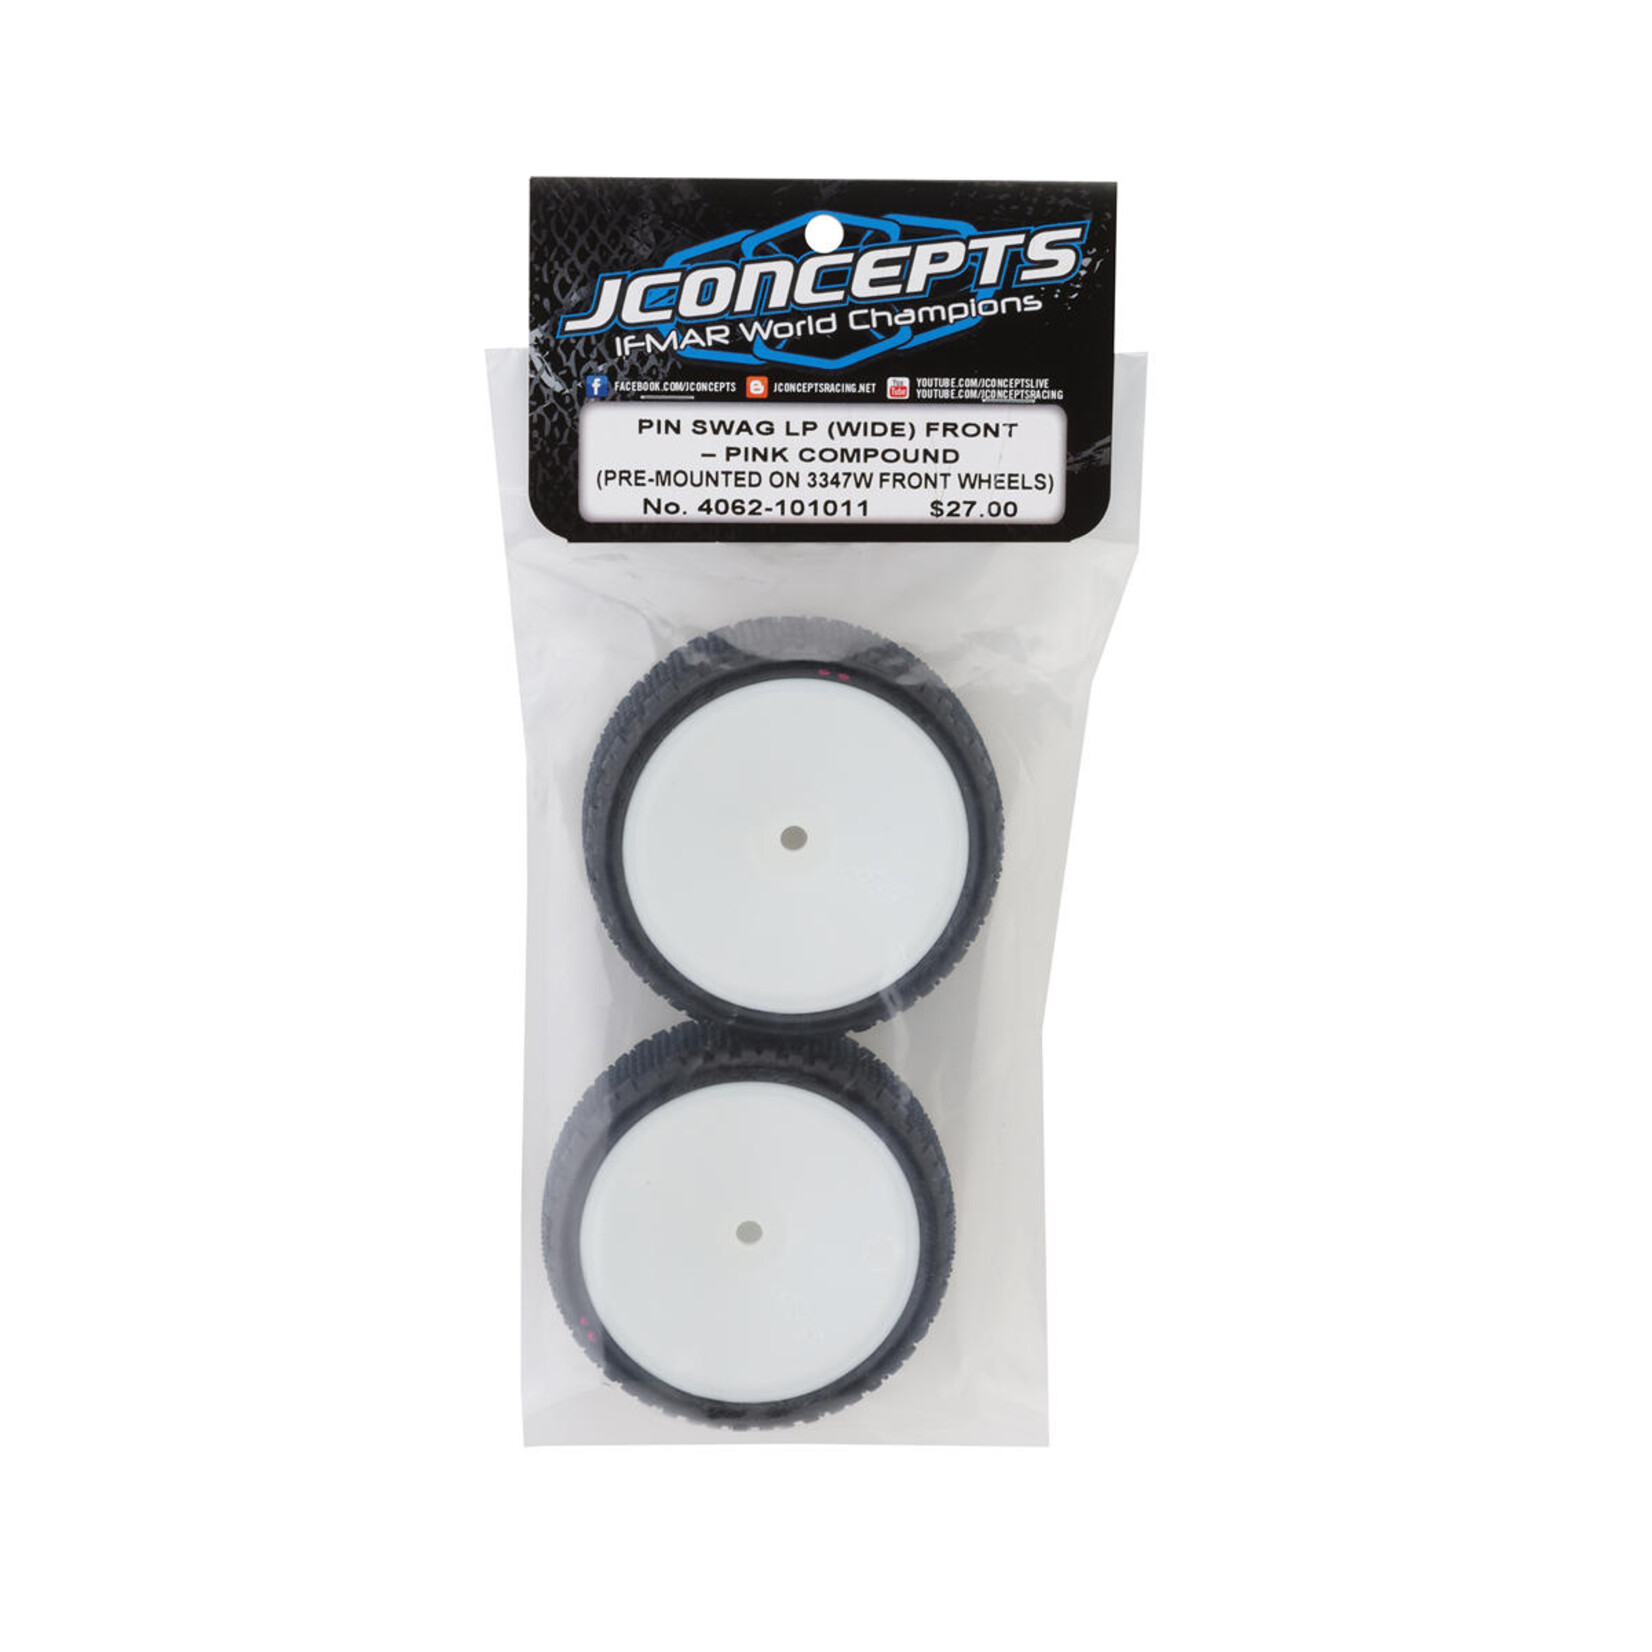 JConcepts JConcepts Pin Swag LP Wide 2.2" Pre-Mounted 2WD Front Buggy Carpet Tires (White) (Pink) (2) w/12mm Hex #4062-101011